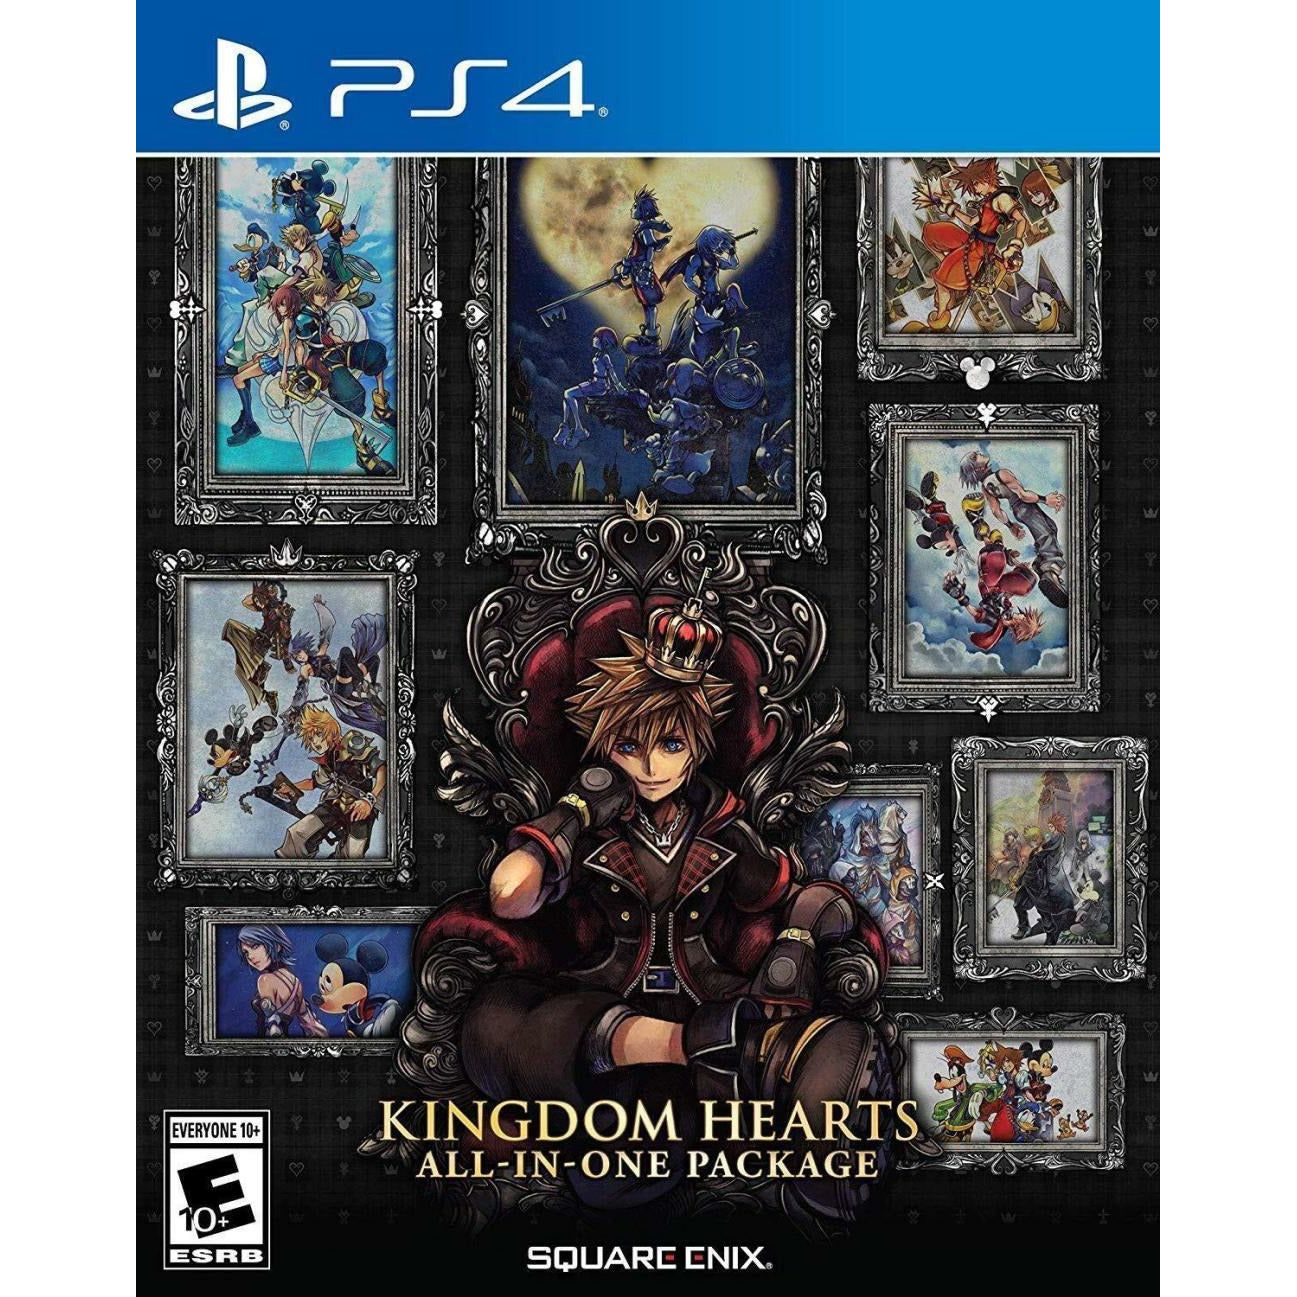 PS4 - Kingdom Hearts All-In-One Package